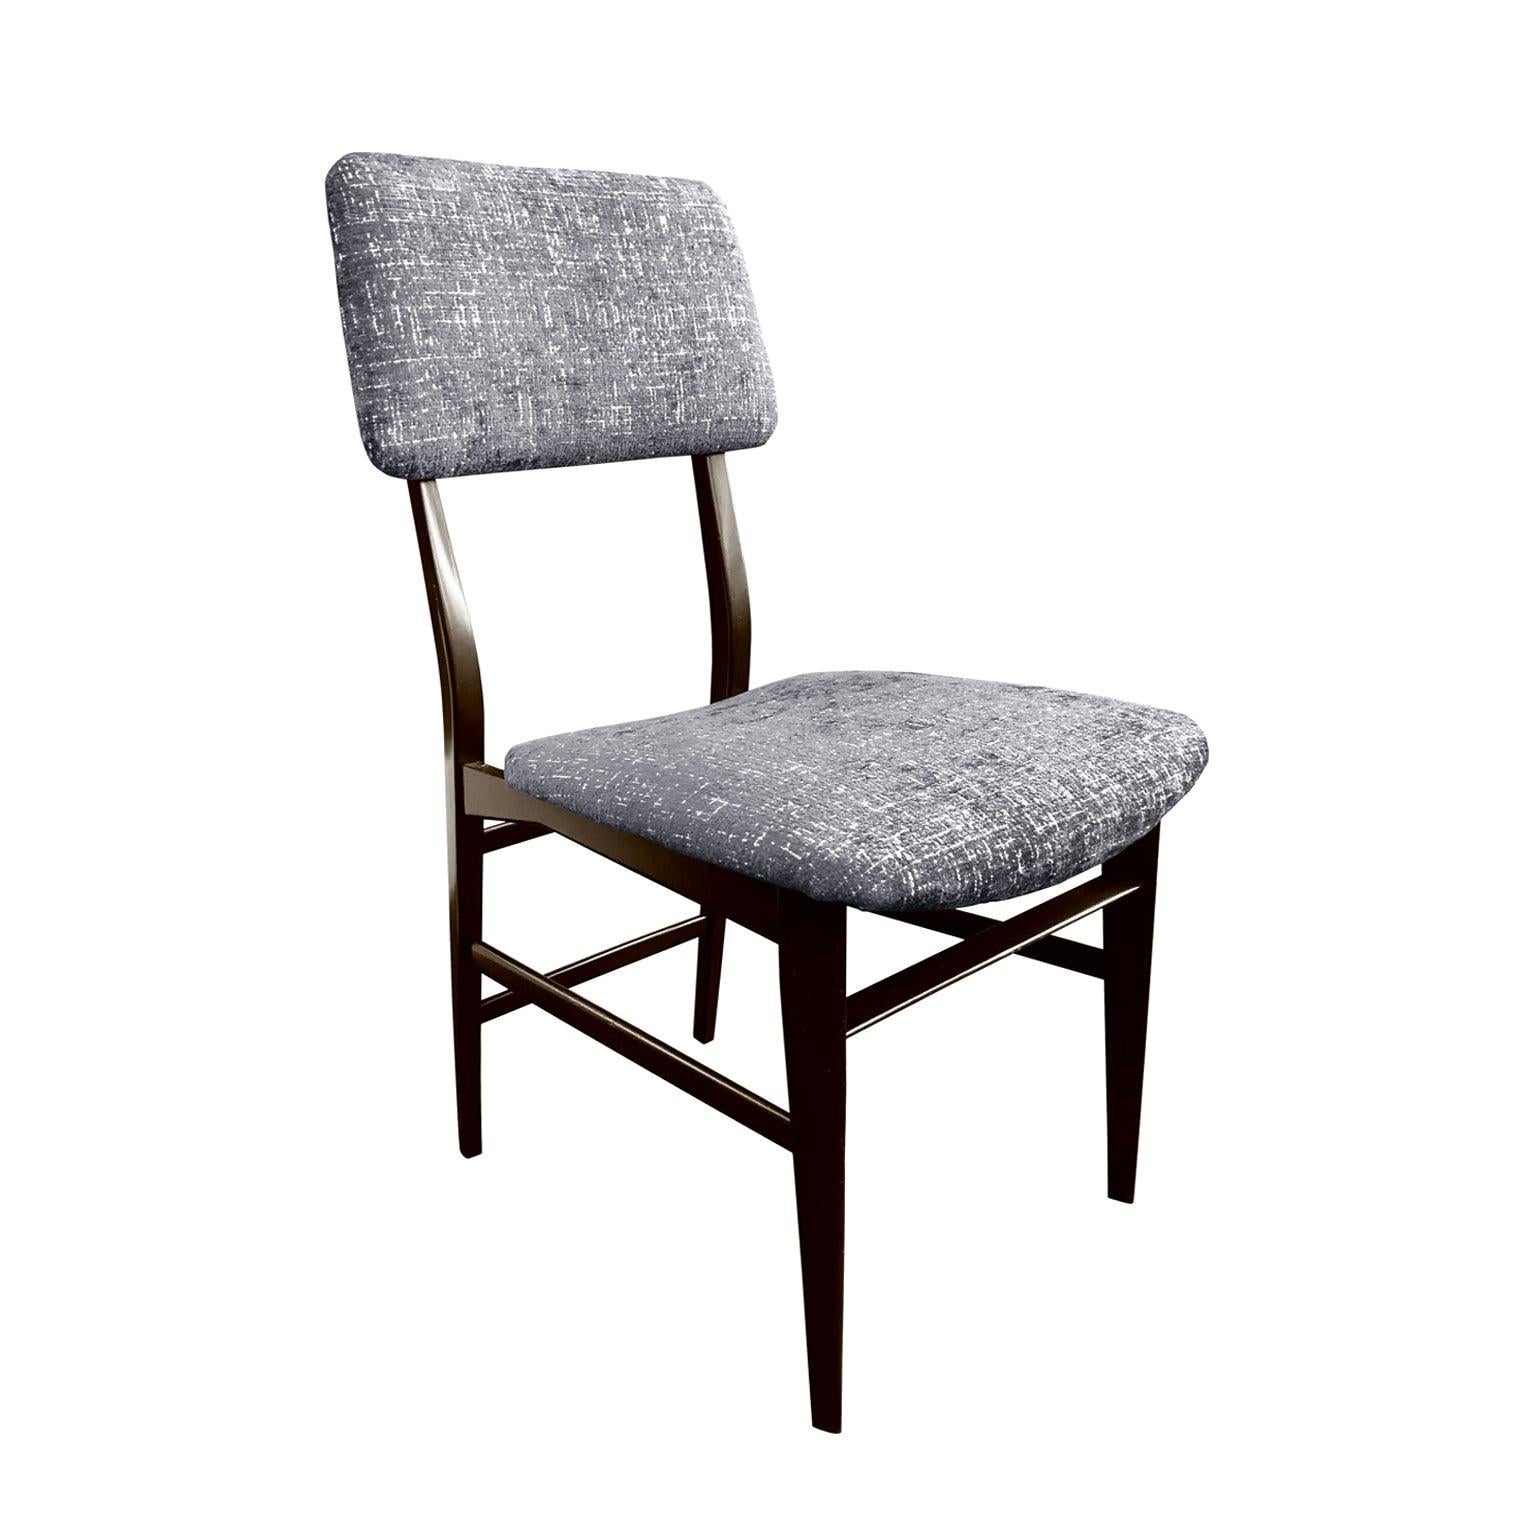 Midcentury Italian Vittorio Dassi Wood Frame Dining Chair in Steel Blue Velvet In Excellent Condition For Sale In Stamford, CT